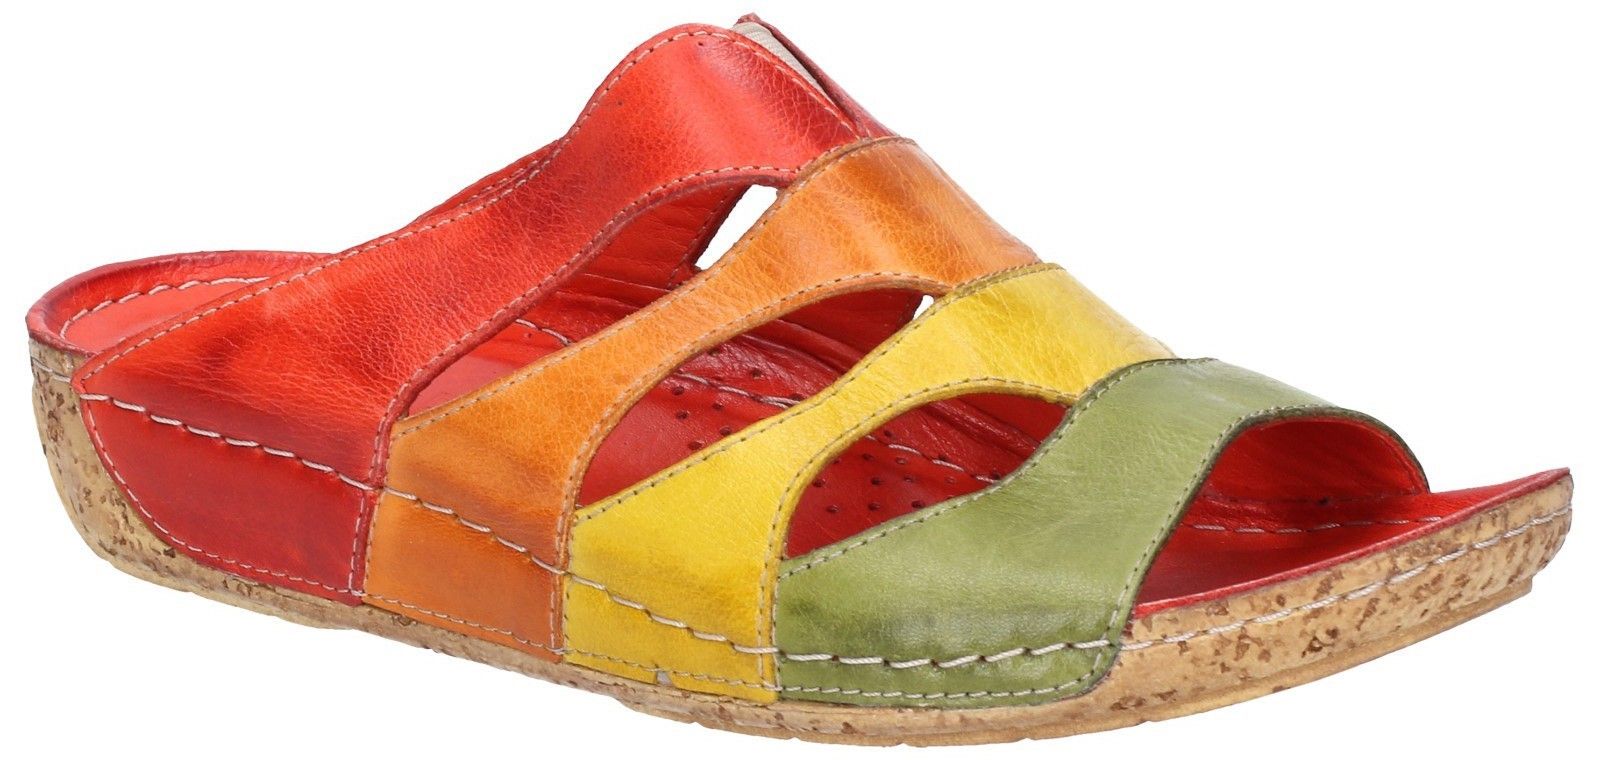 Women's luxury slip on mule sandal with supple leather multi-coloured layers with easy to slip into stretch-fit panel. Women's luxury leather open toe mule sandal. 
Multi-coloured caged upper with cut out panels. 
Elastic V-neck stretch fit gusset. 
Barefoot soft supple leather lining. 
Lightly padded leather-lined foam foot bed.